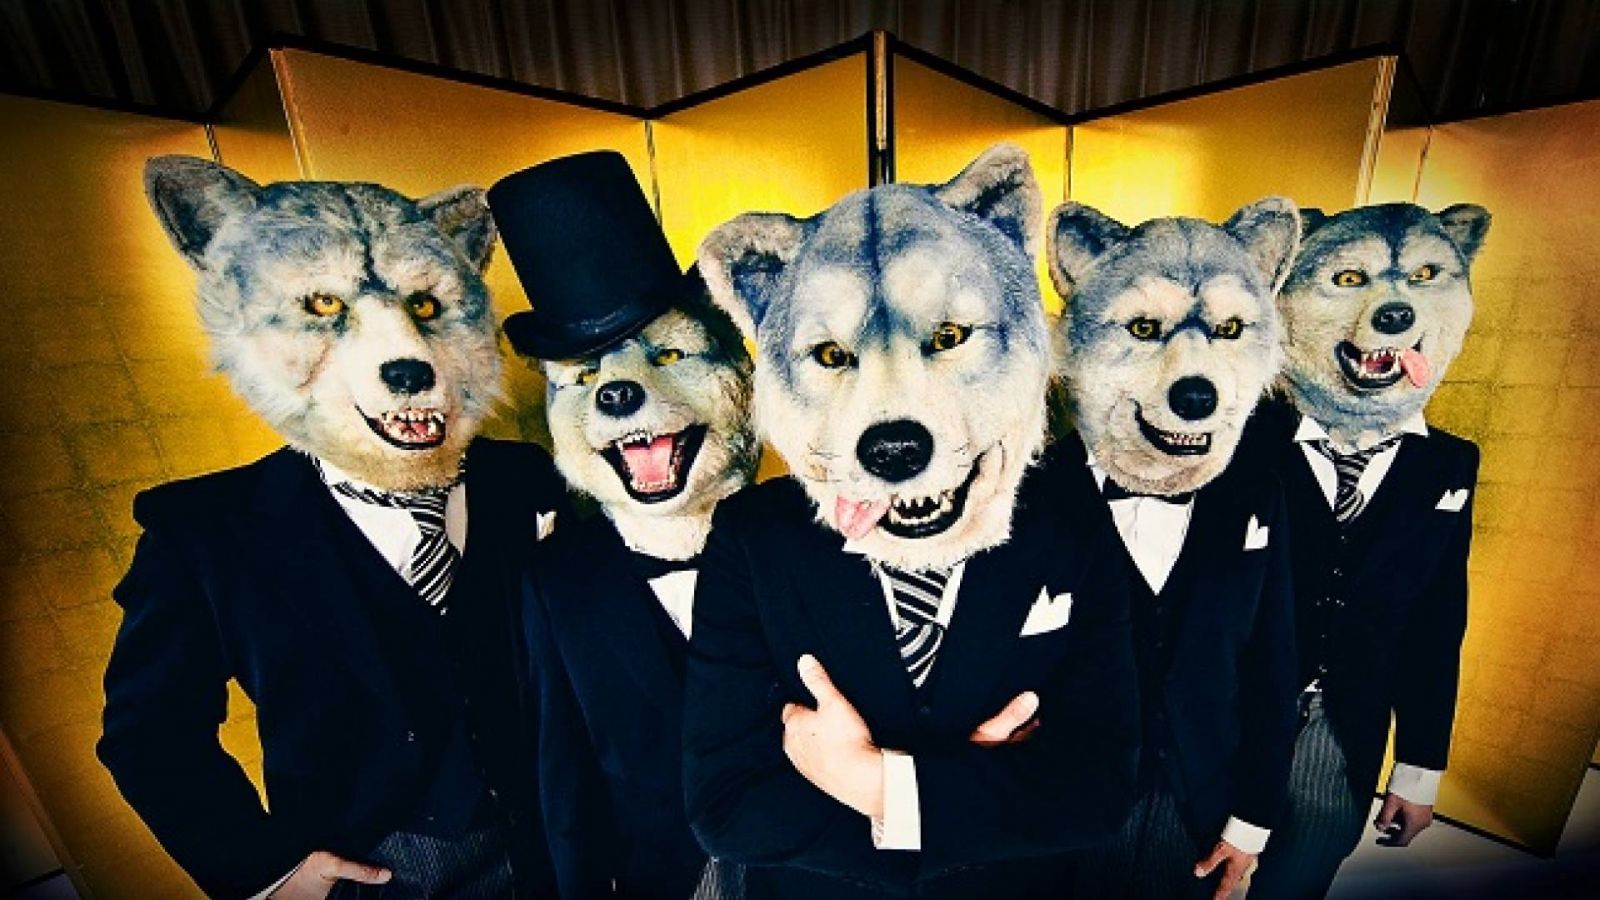 MAN WITH A MISSION julkaisee albumin © MAN WITH A MISSION